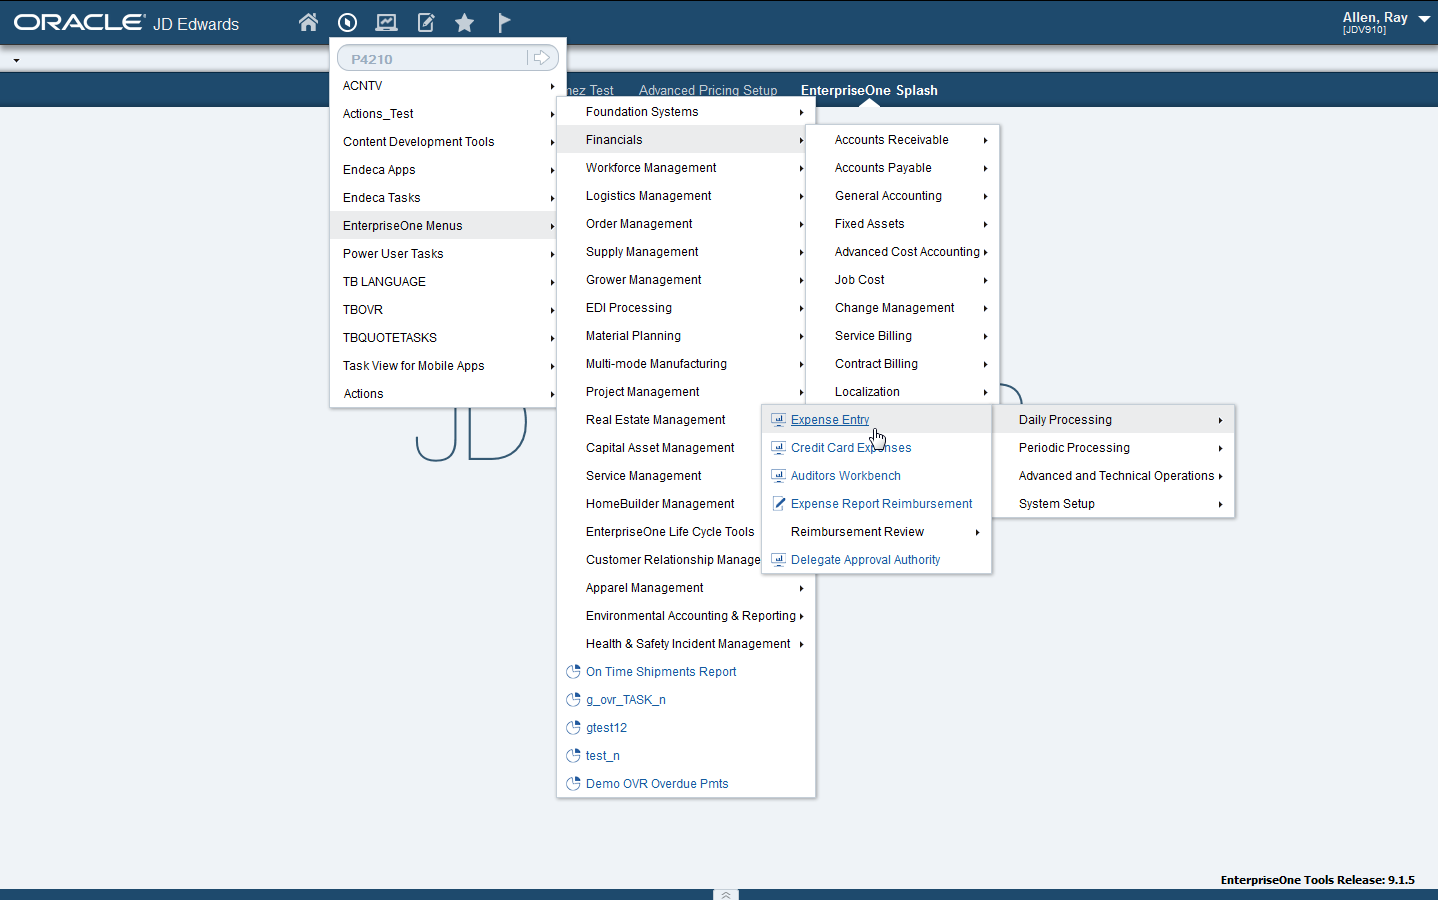 how to check jd edwards enterprise one version